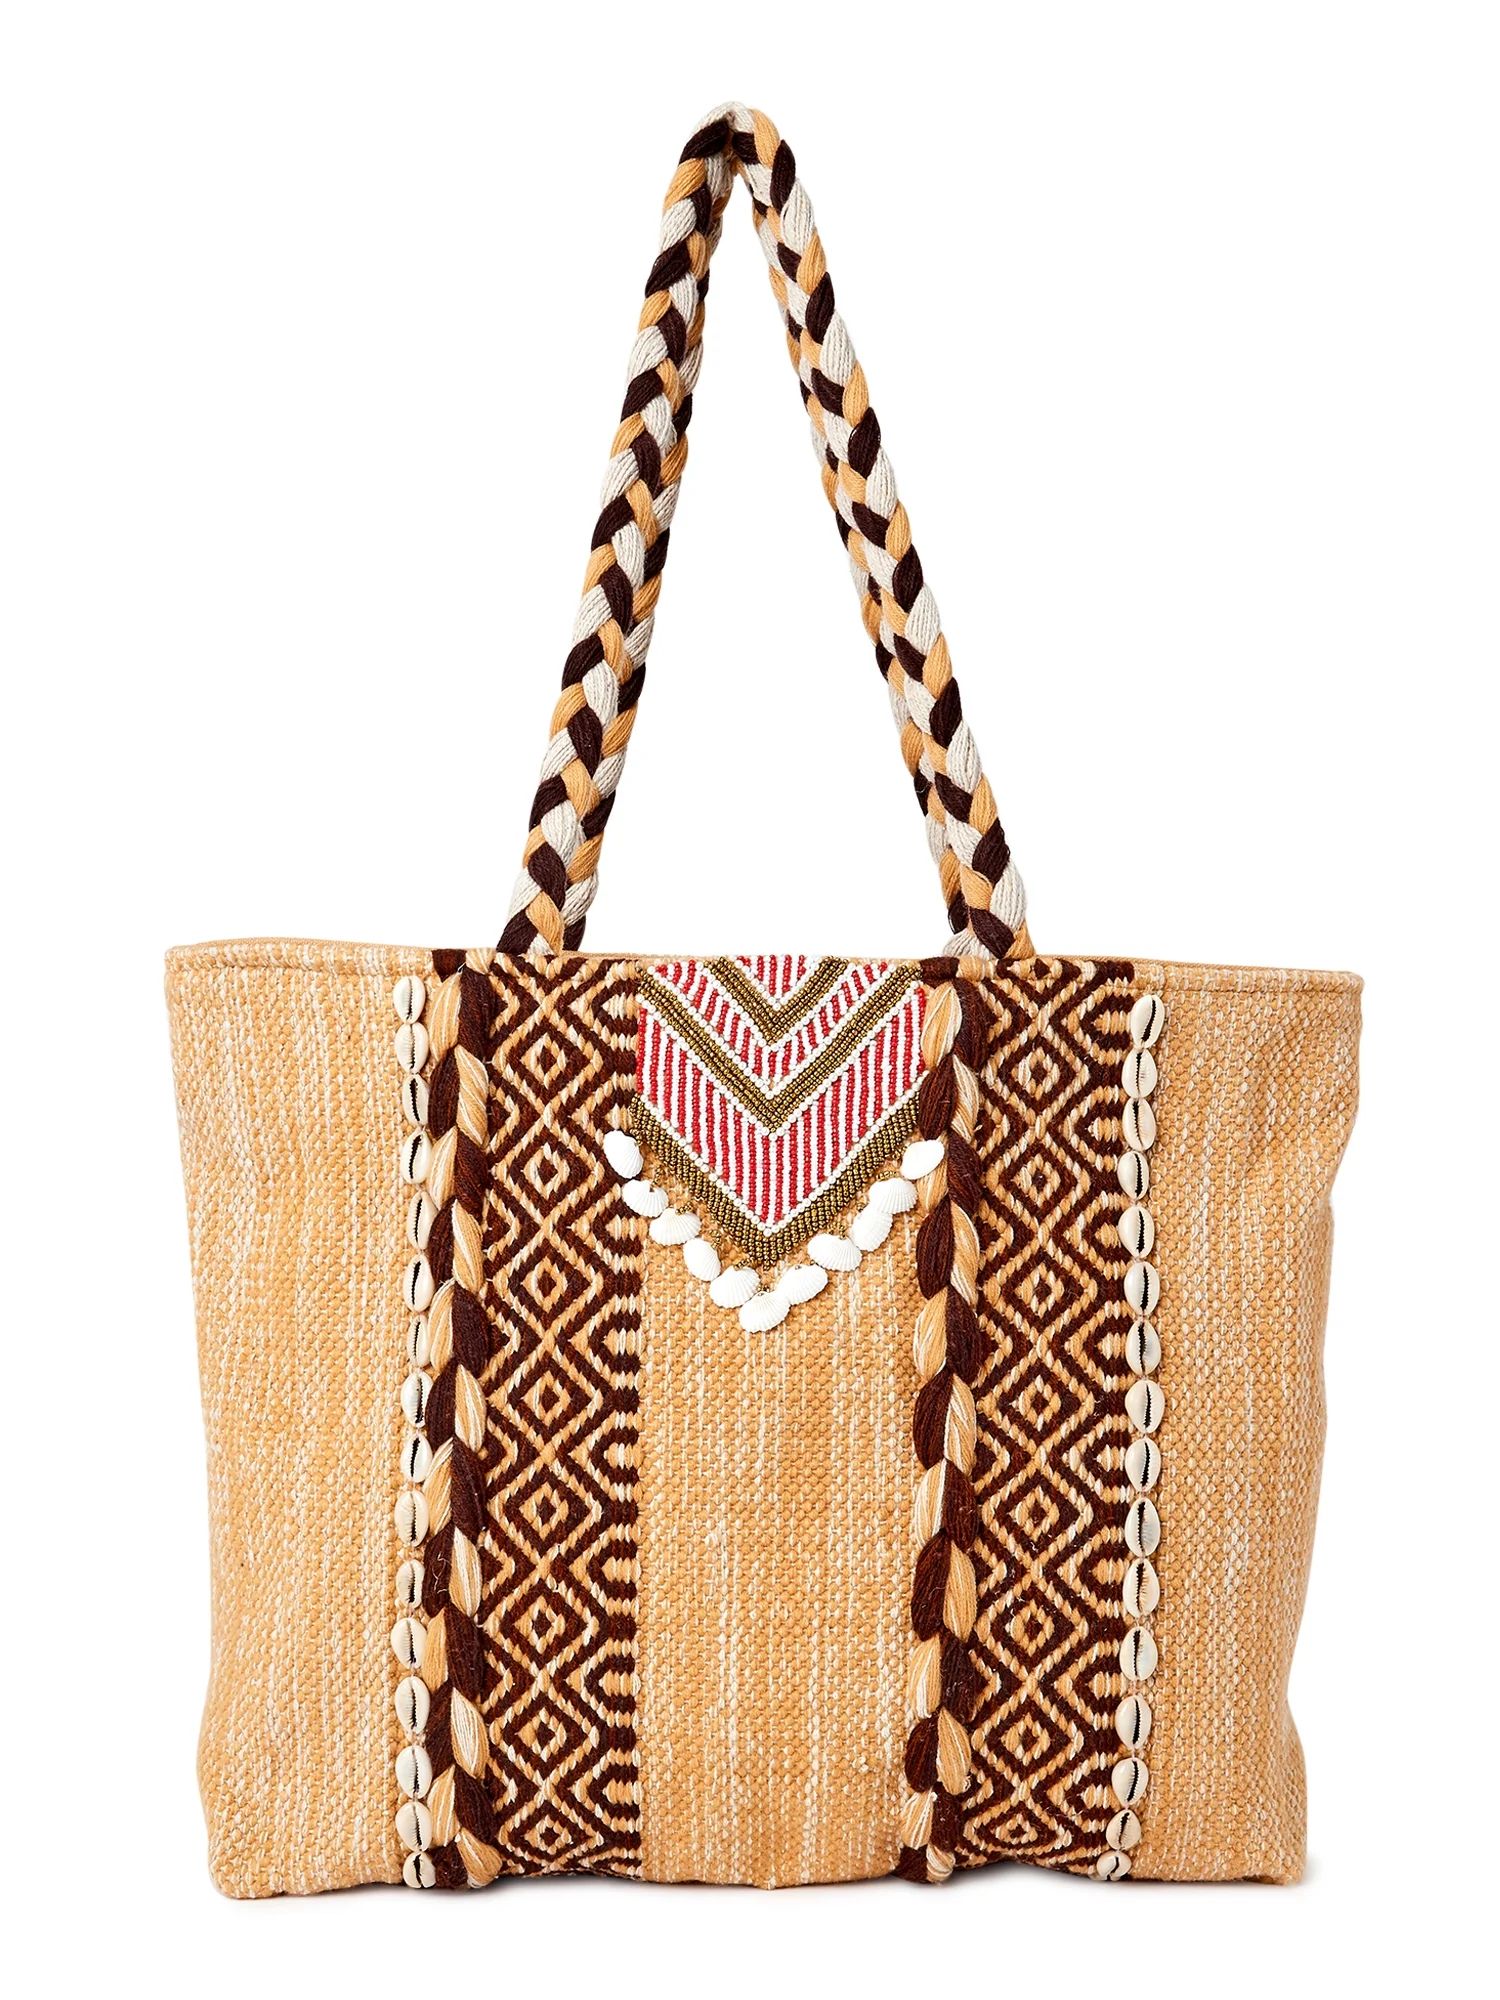 Twig & Arrow Women's Woven Tote Beach Bag with Braided Shoulder Straps | Walmart (US)